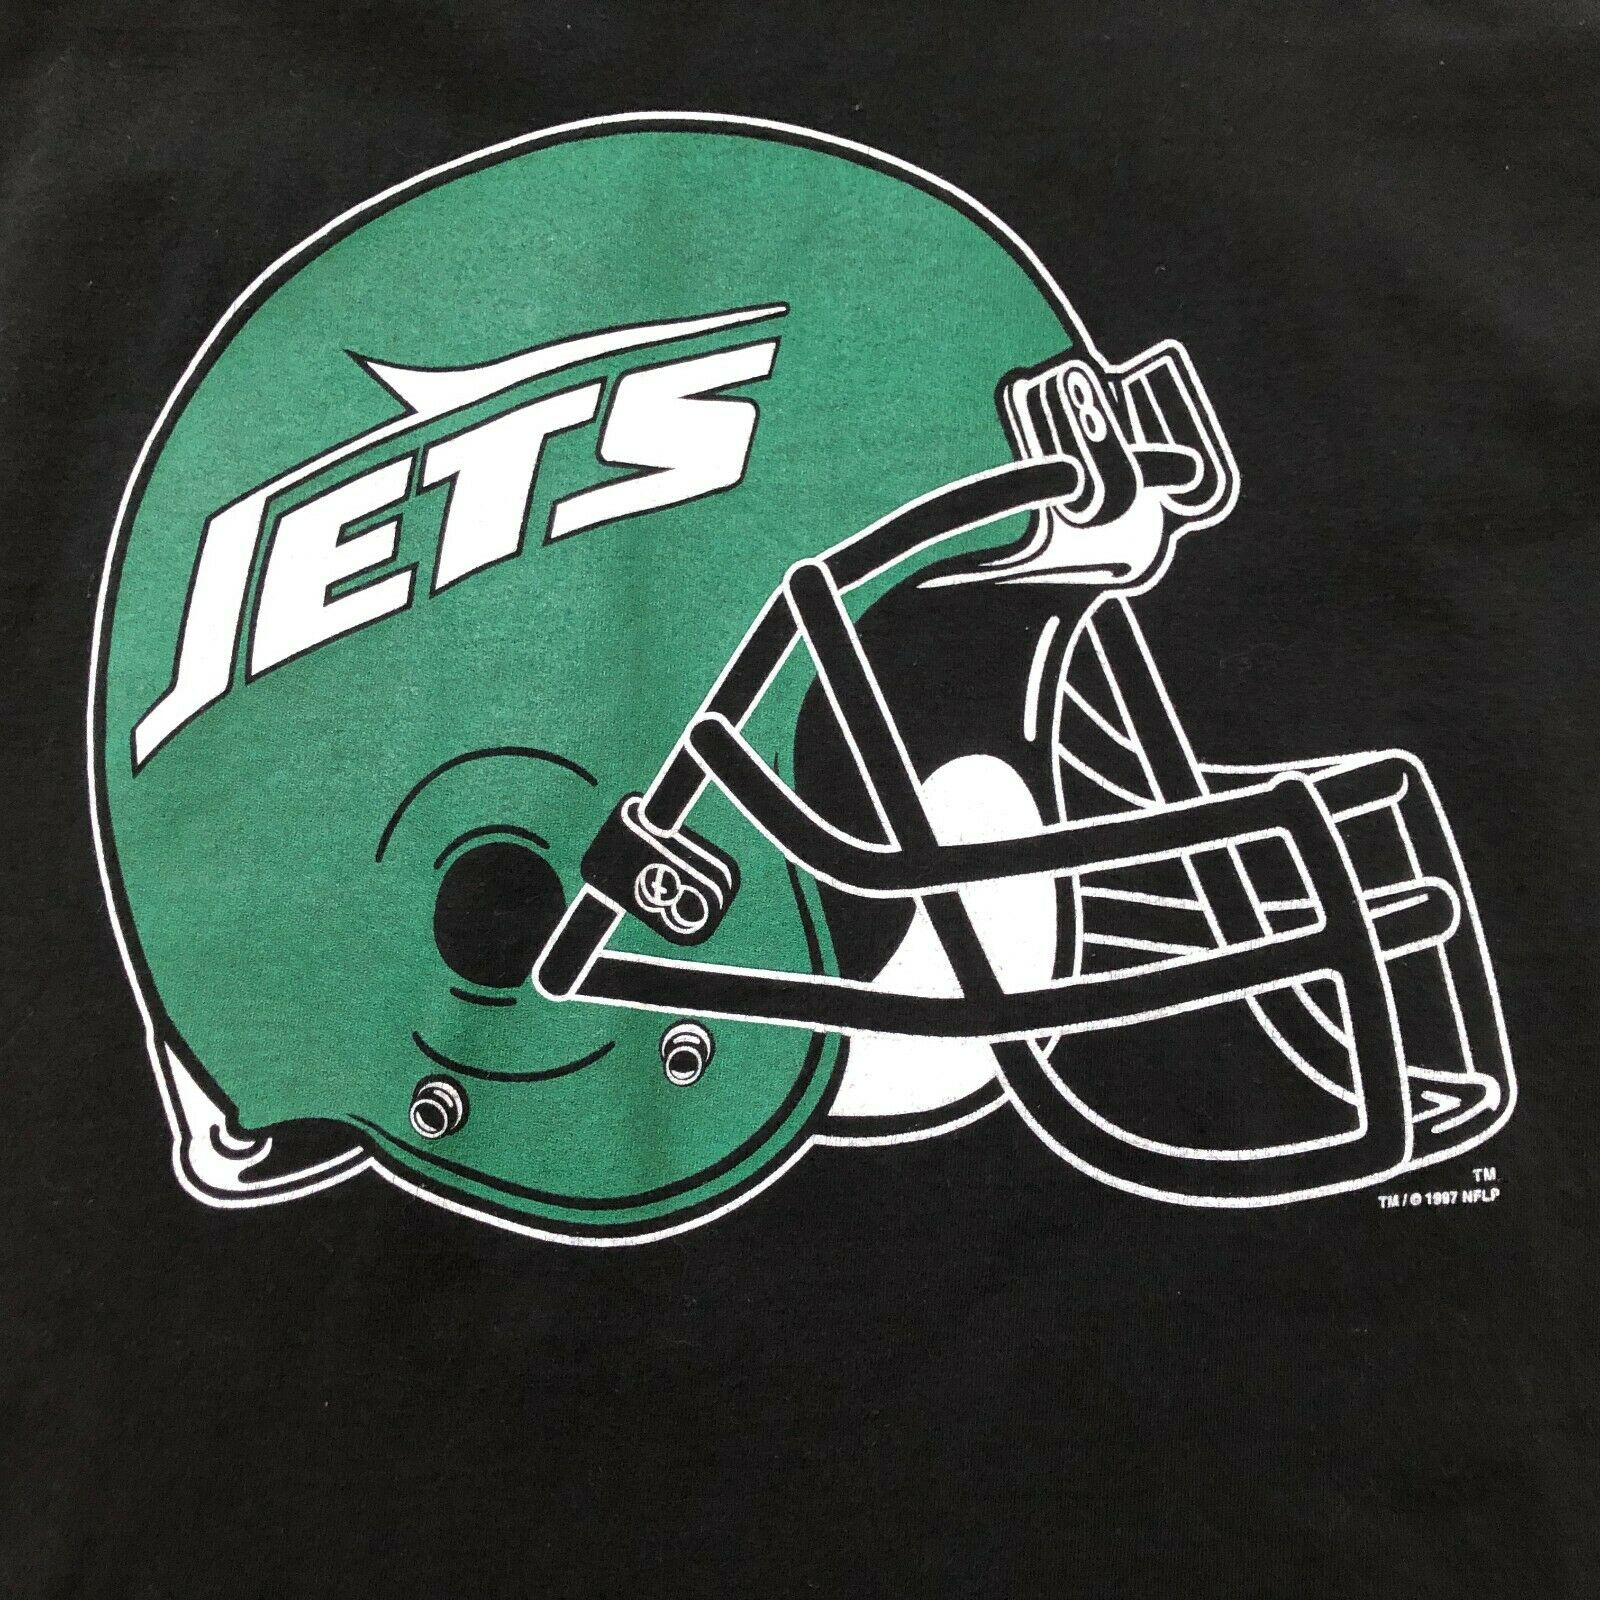 New York Jets Helmet Retro T-Shirt from Homage. | Officially Licensed Vintage NFL Apparel from Homage Pro Shop.